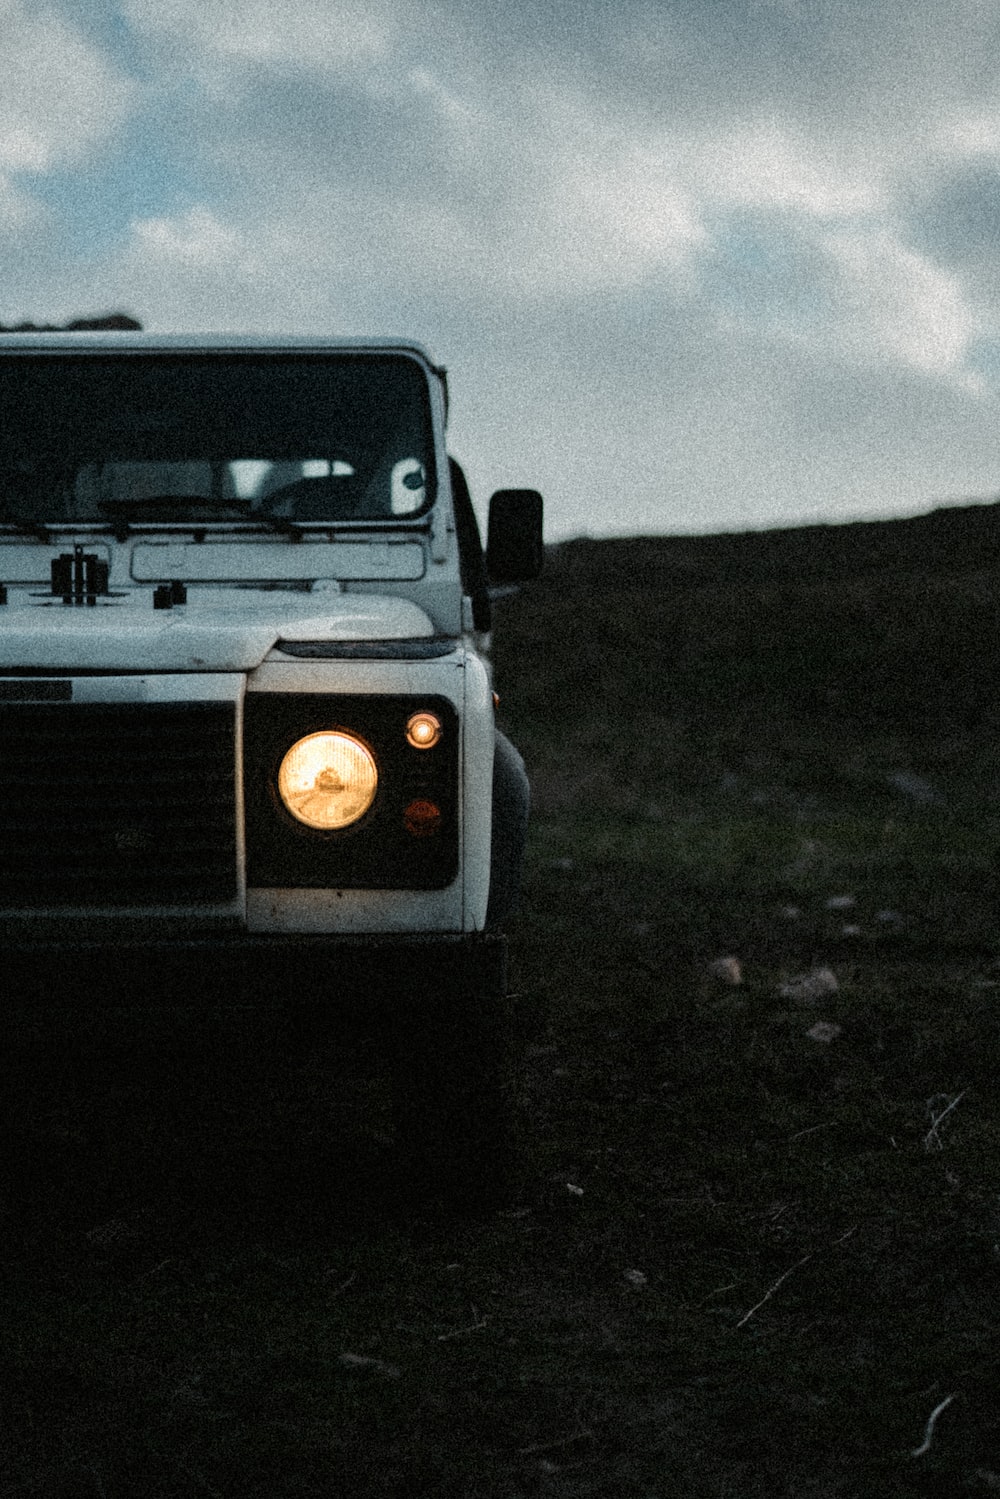 Land Rover Defender Picture. Download Free Image